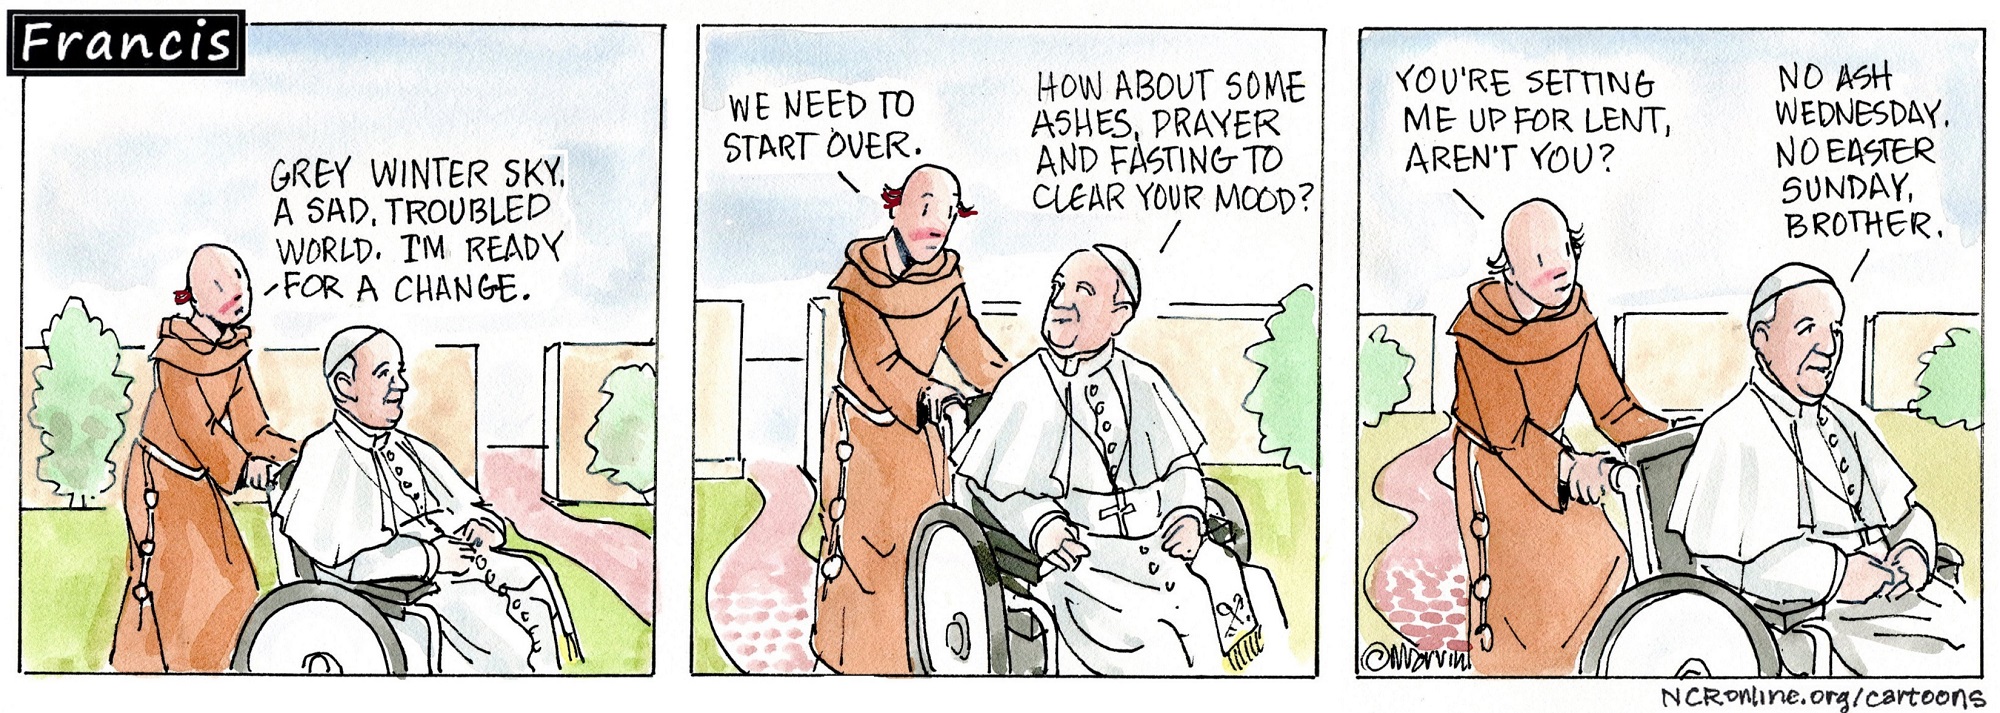 Francis, the comic strip: Brother Leo is ready for a change, and Francis has an idea.